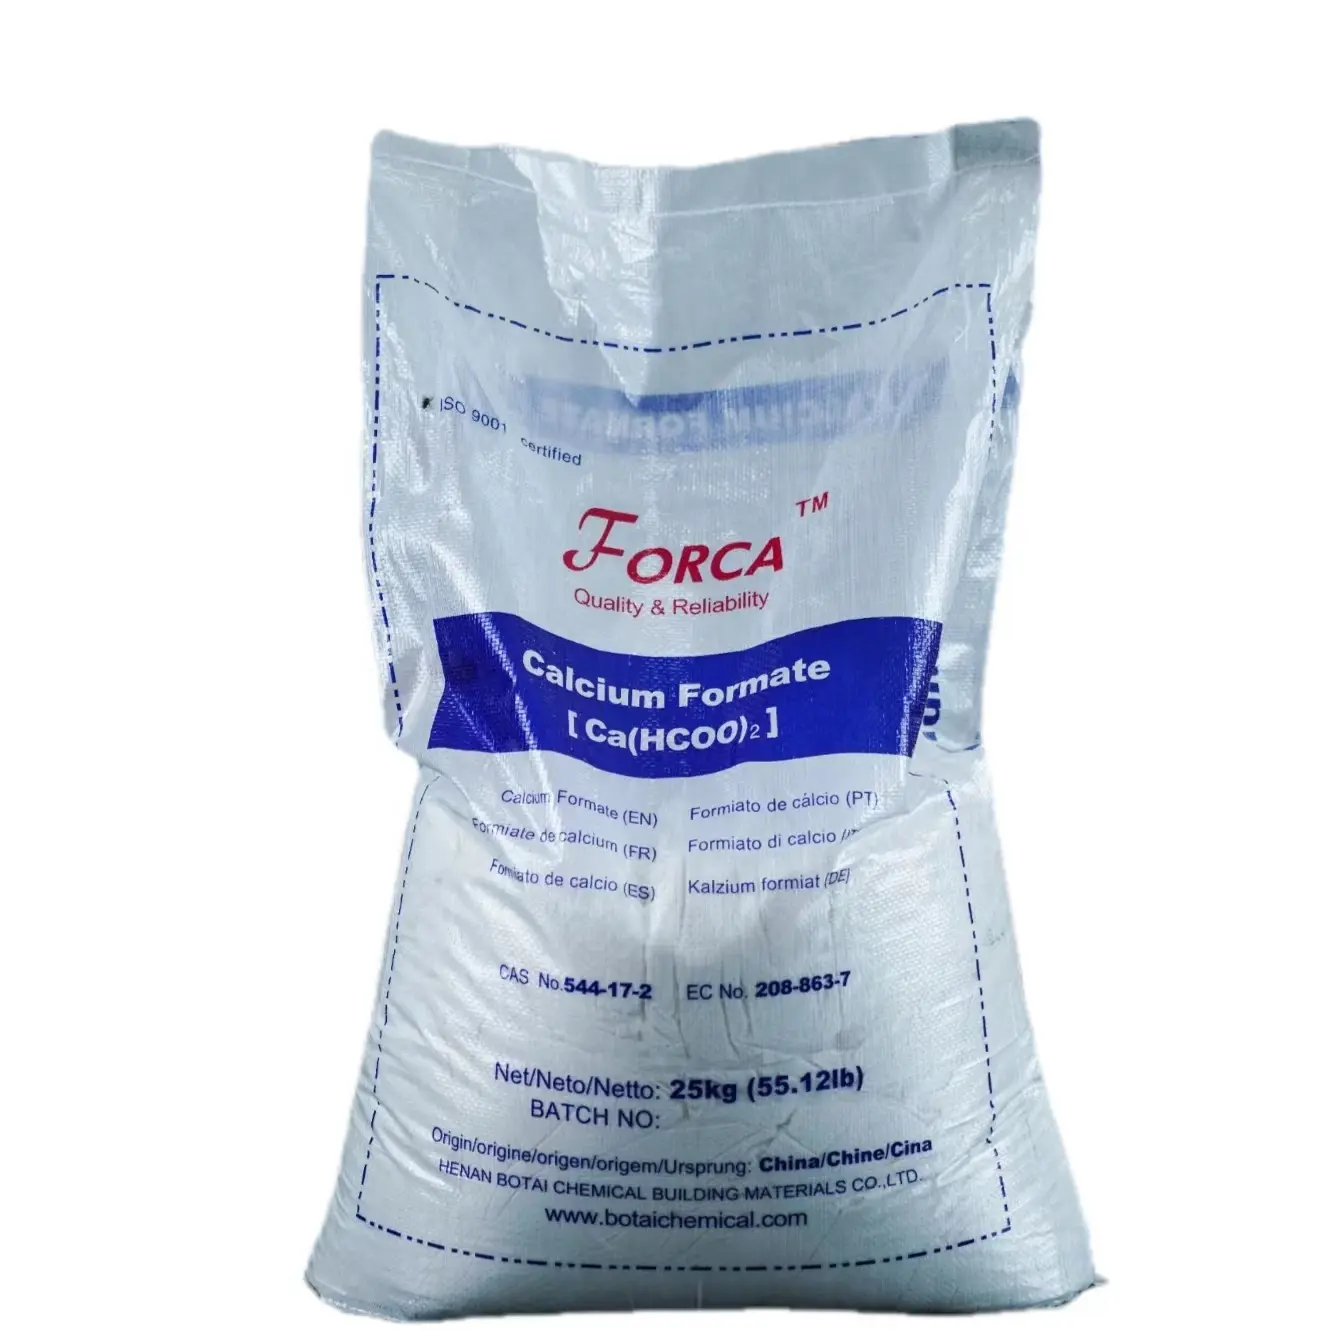 Forca Calcium Formate 98% Water Solubility Mold Inhibitor Calcium Formate powder Feed Additive